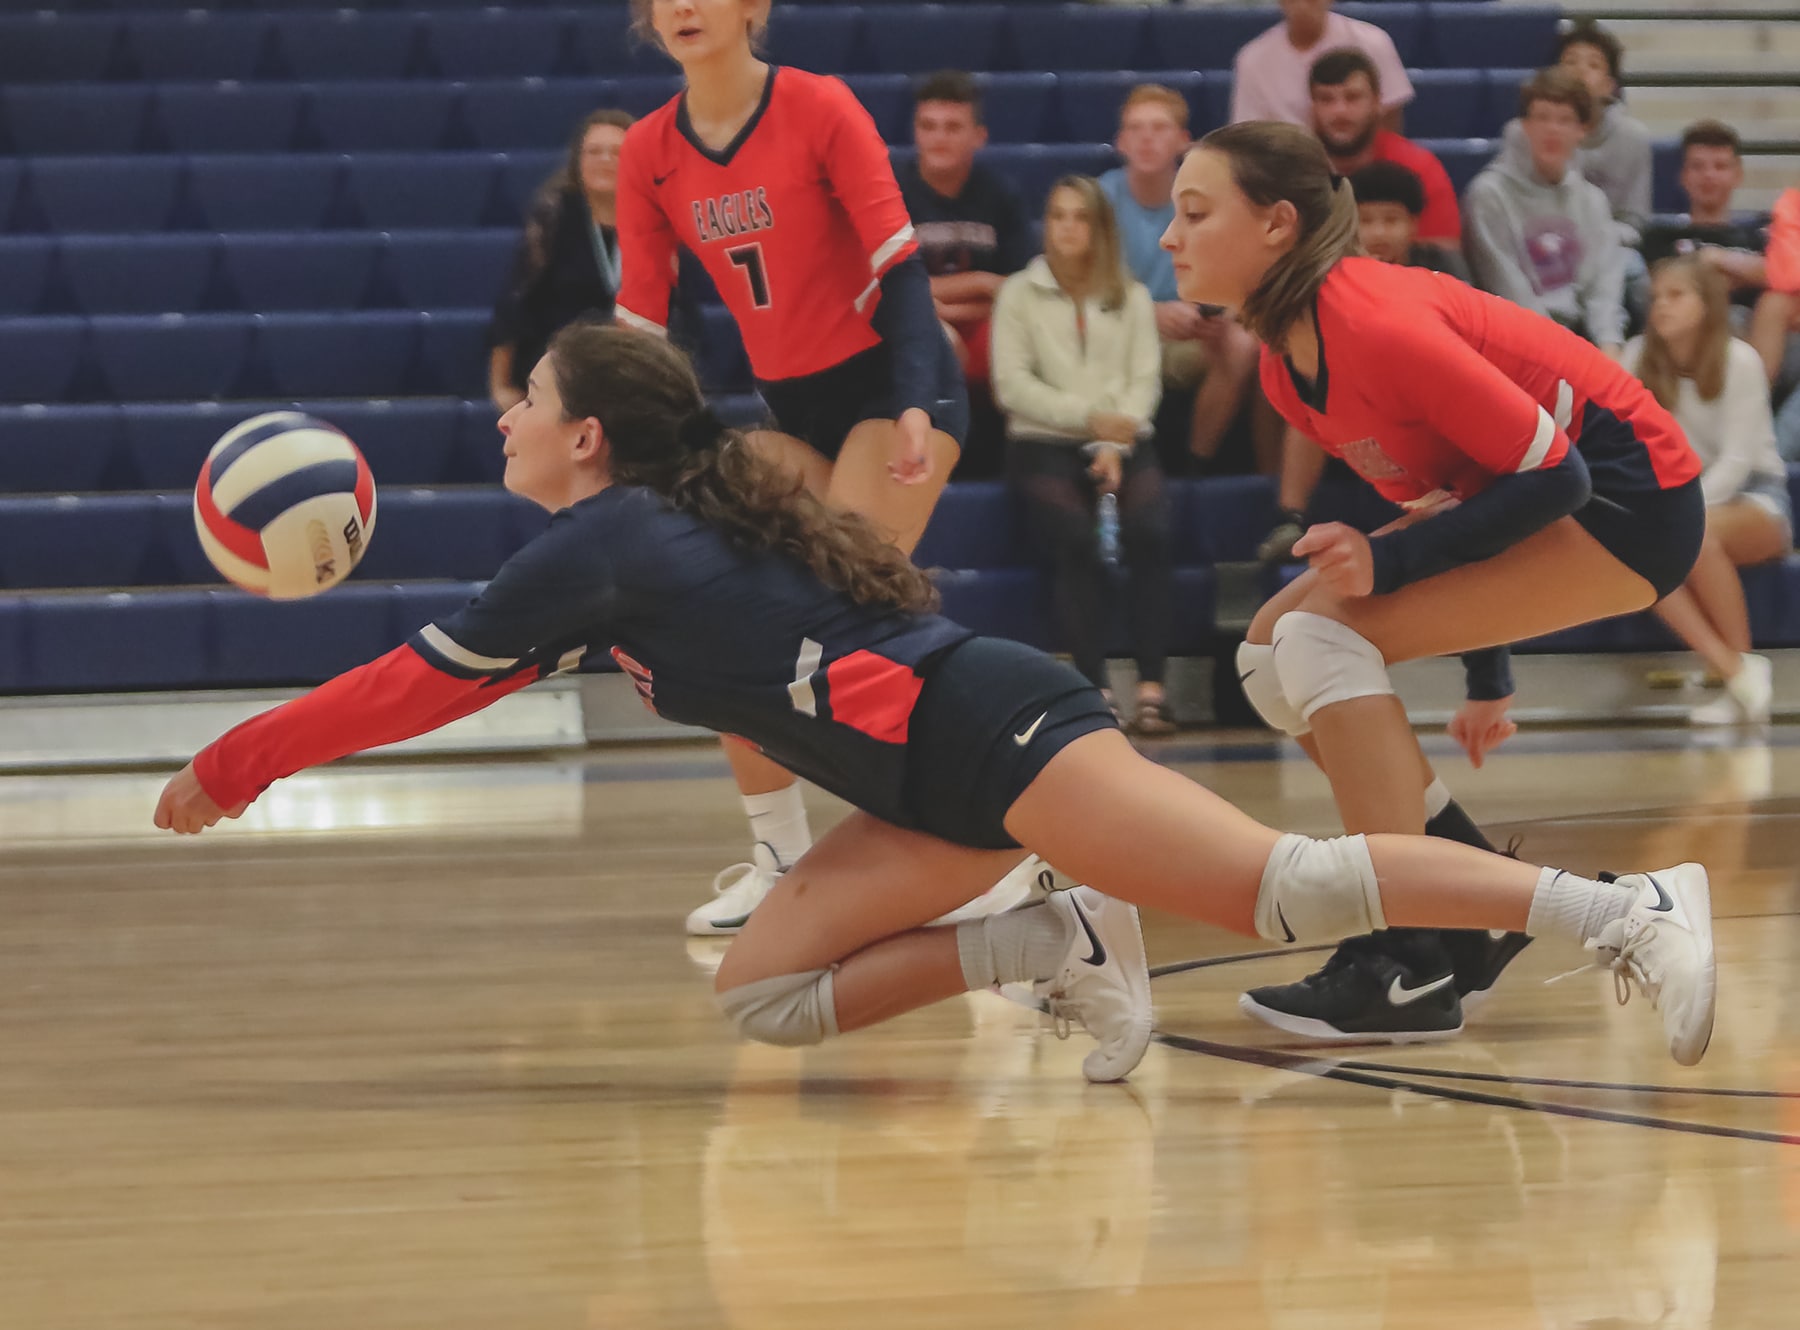 Eagles Junior Emily Eurell attempts to bunt the ball for a set during the game against Crystal River Tuesday at F.W. Springstead High. Emily achieved 18 digs during the game against Crystal River.